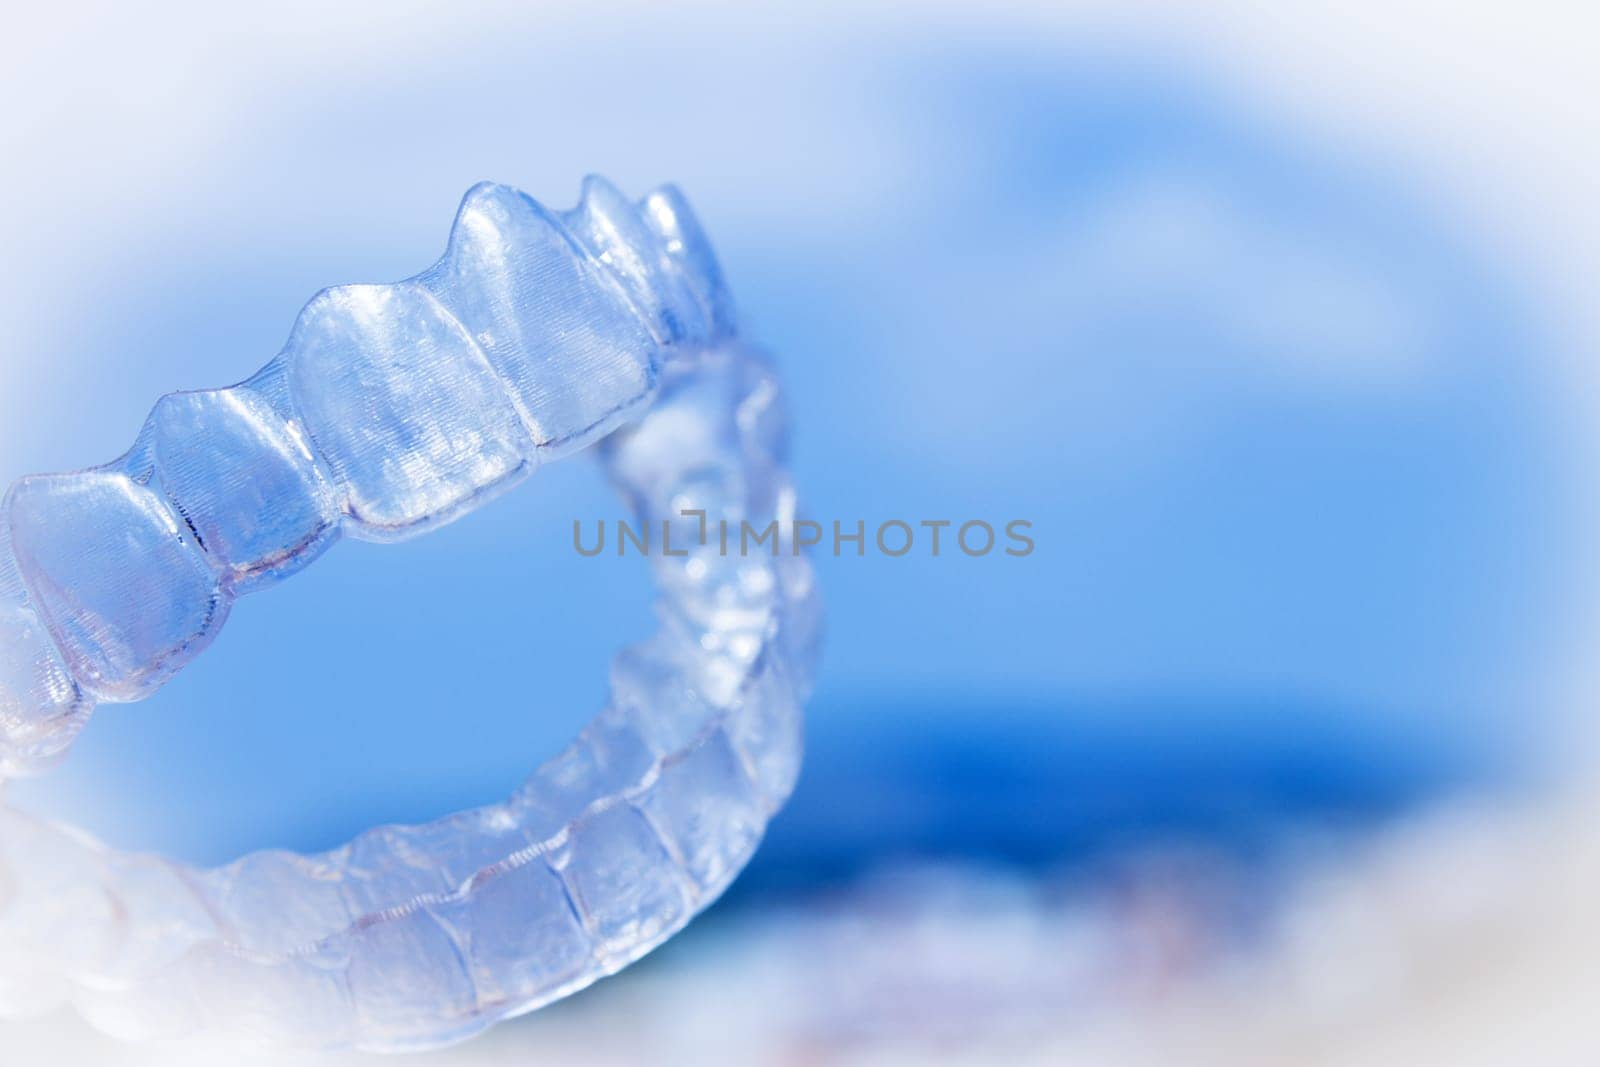 Invisible teeth aligner on light background. No people